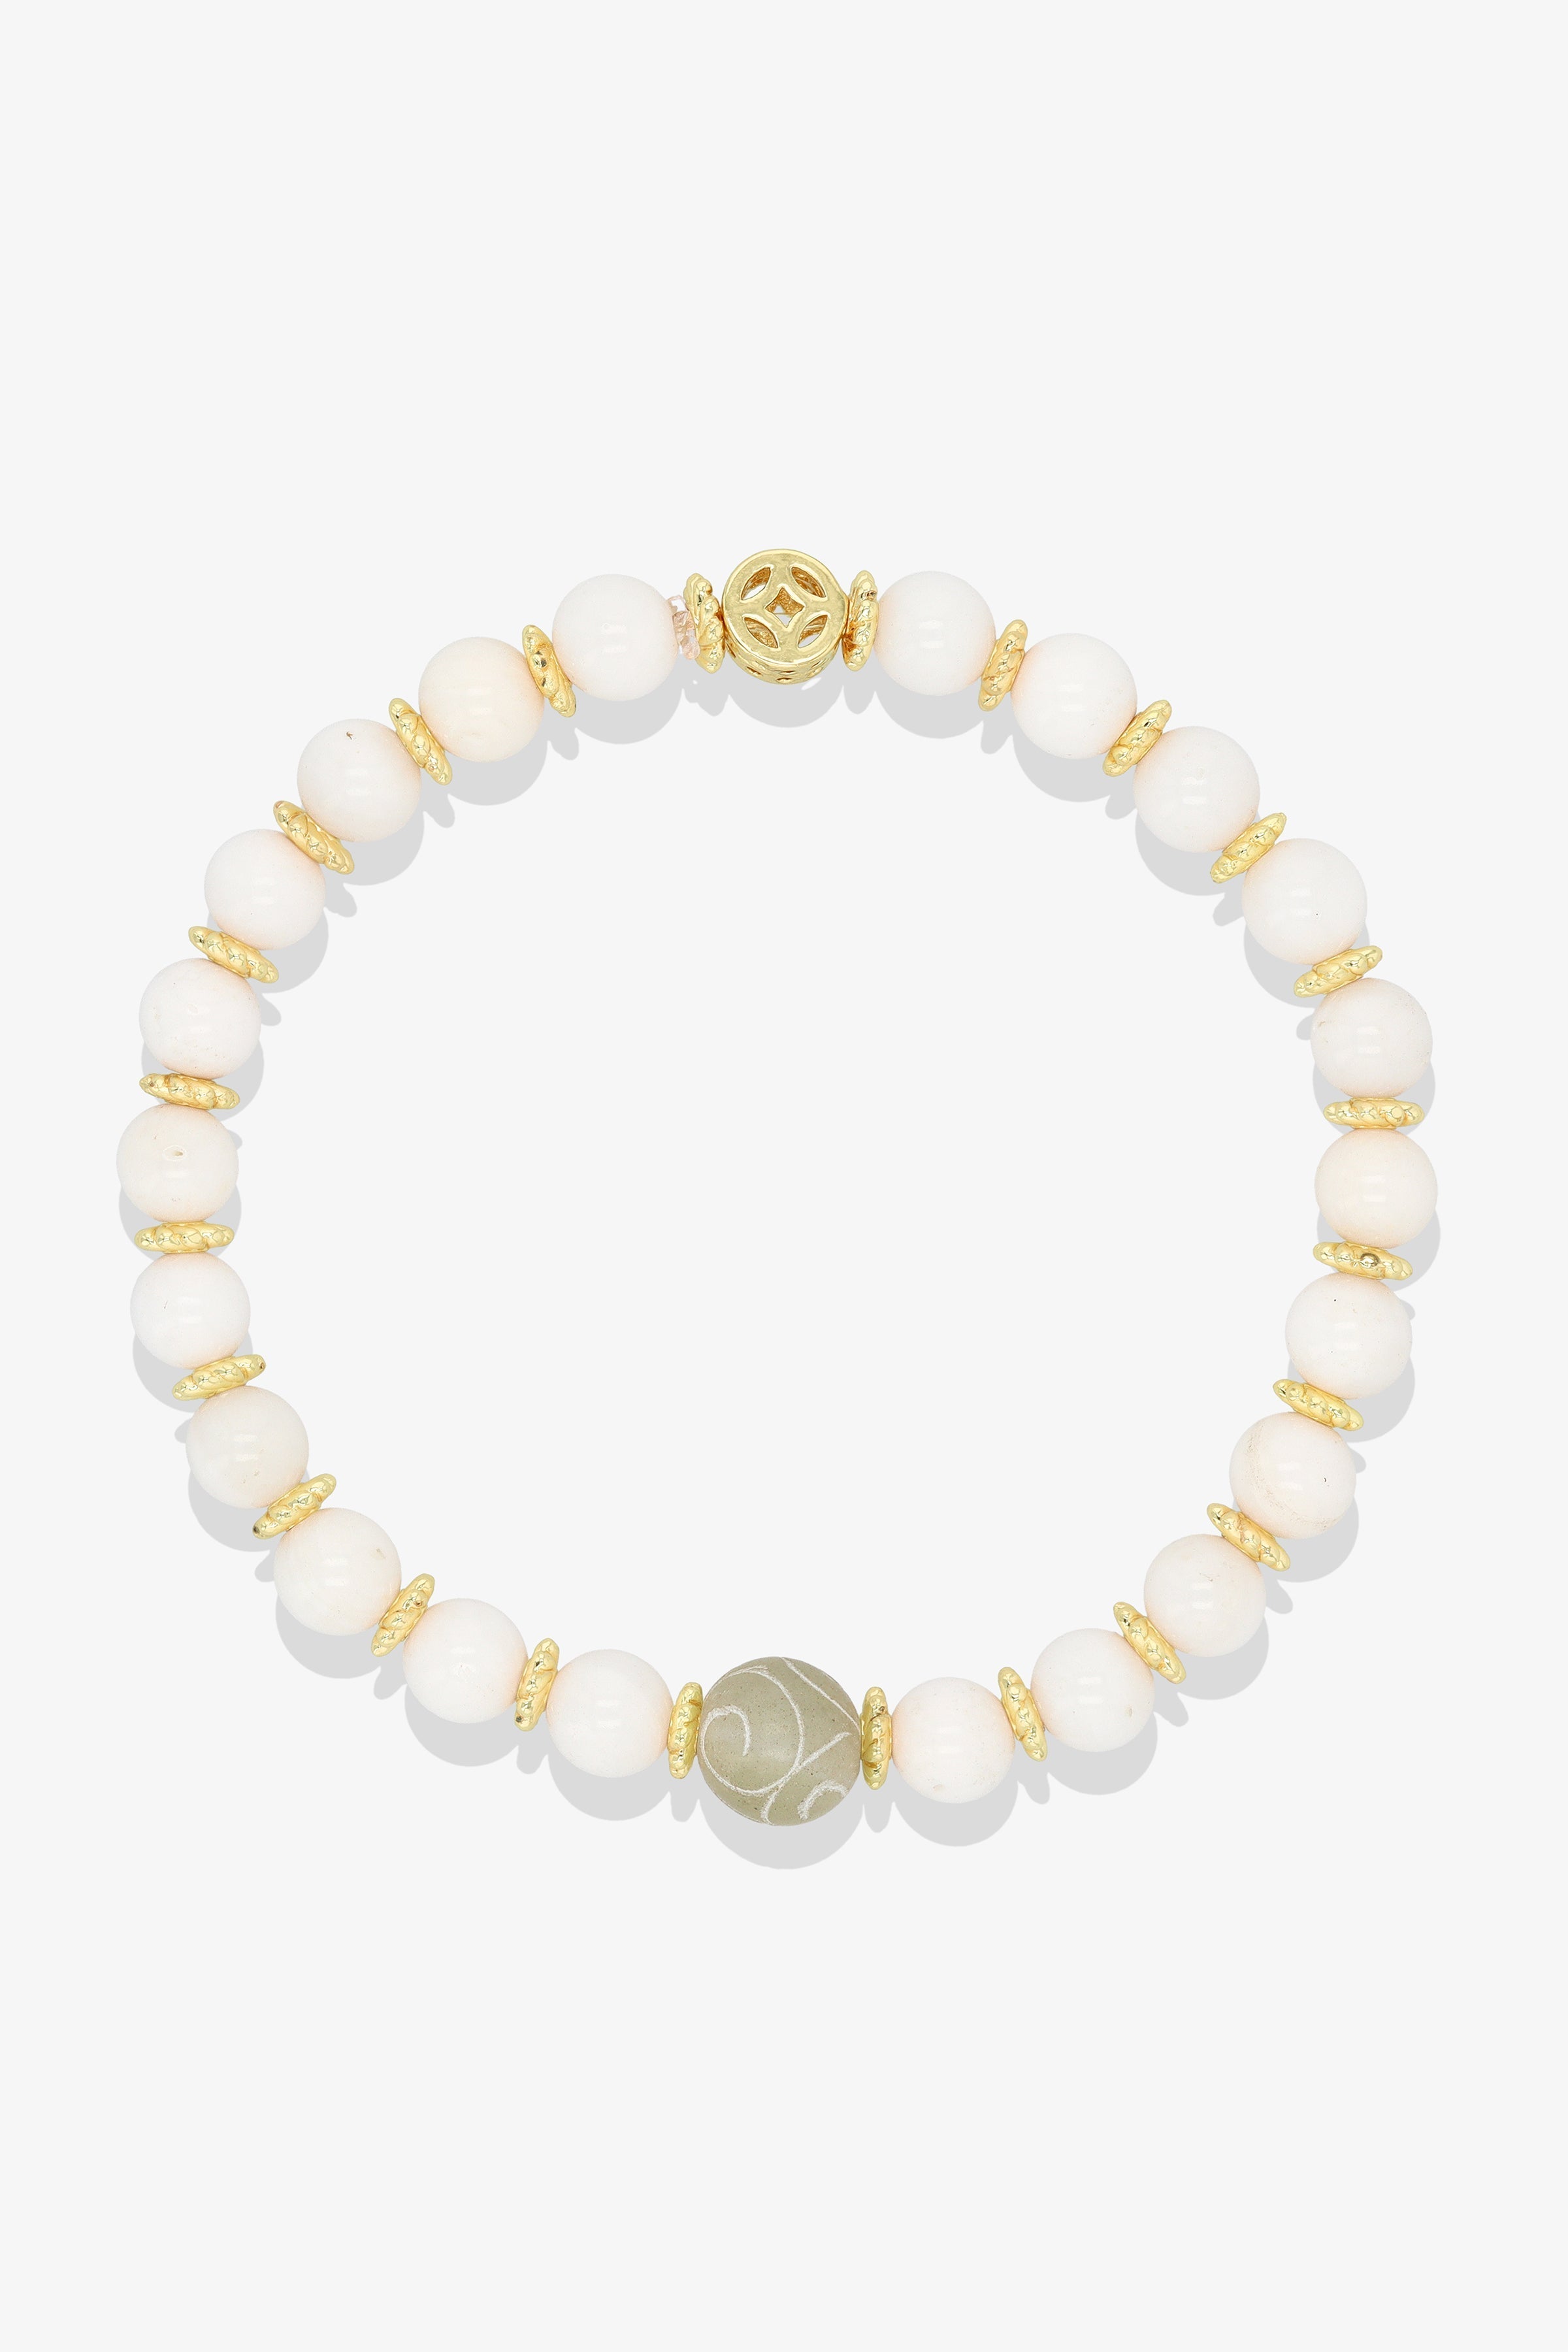 Rose Quartz with Gold Lucky Coin and White Jade charm Bracelet